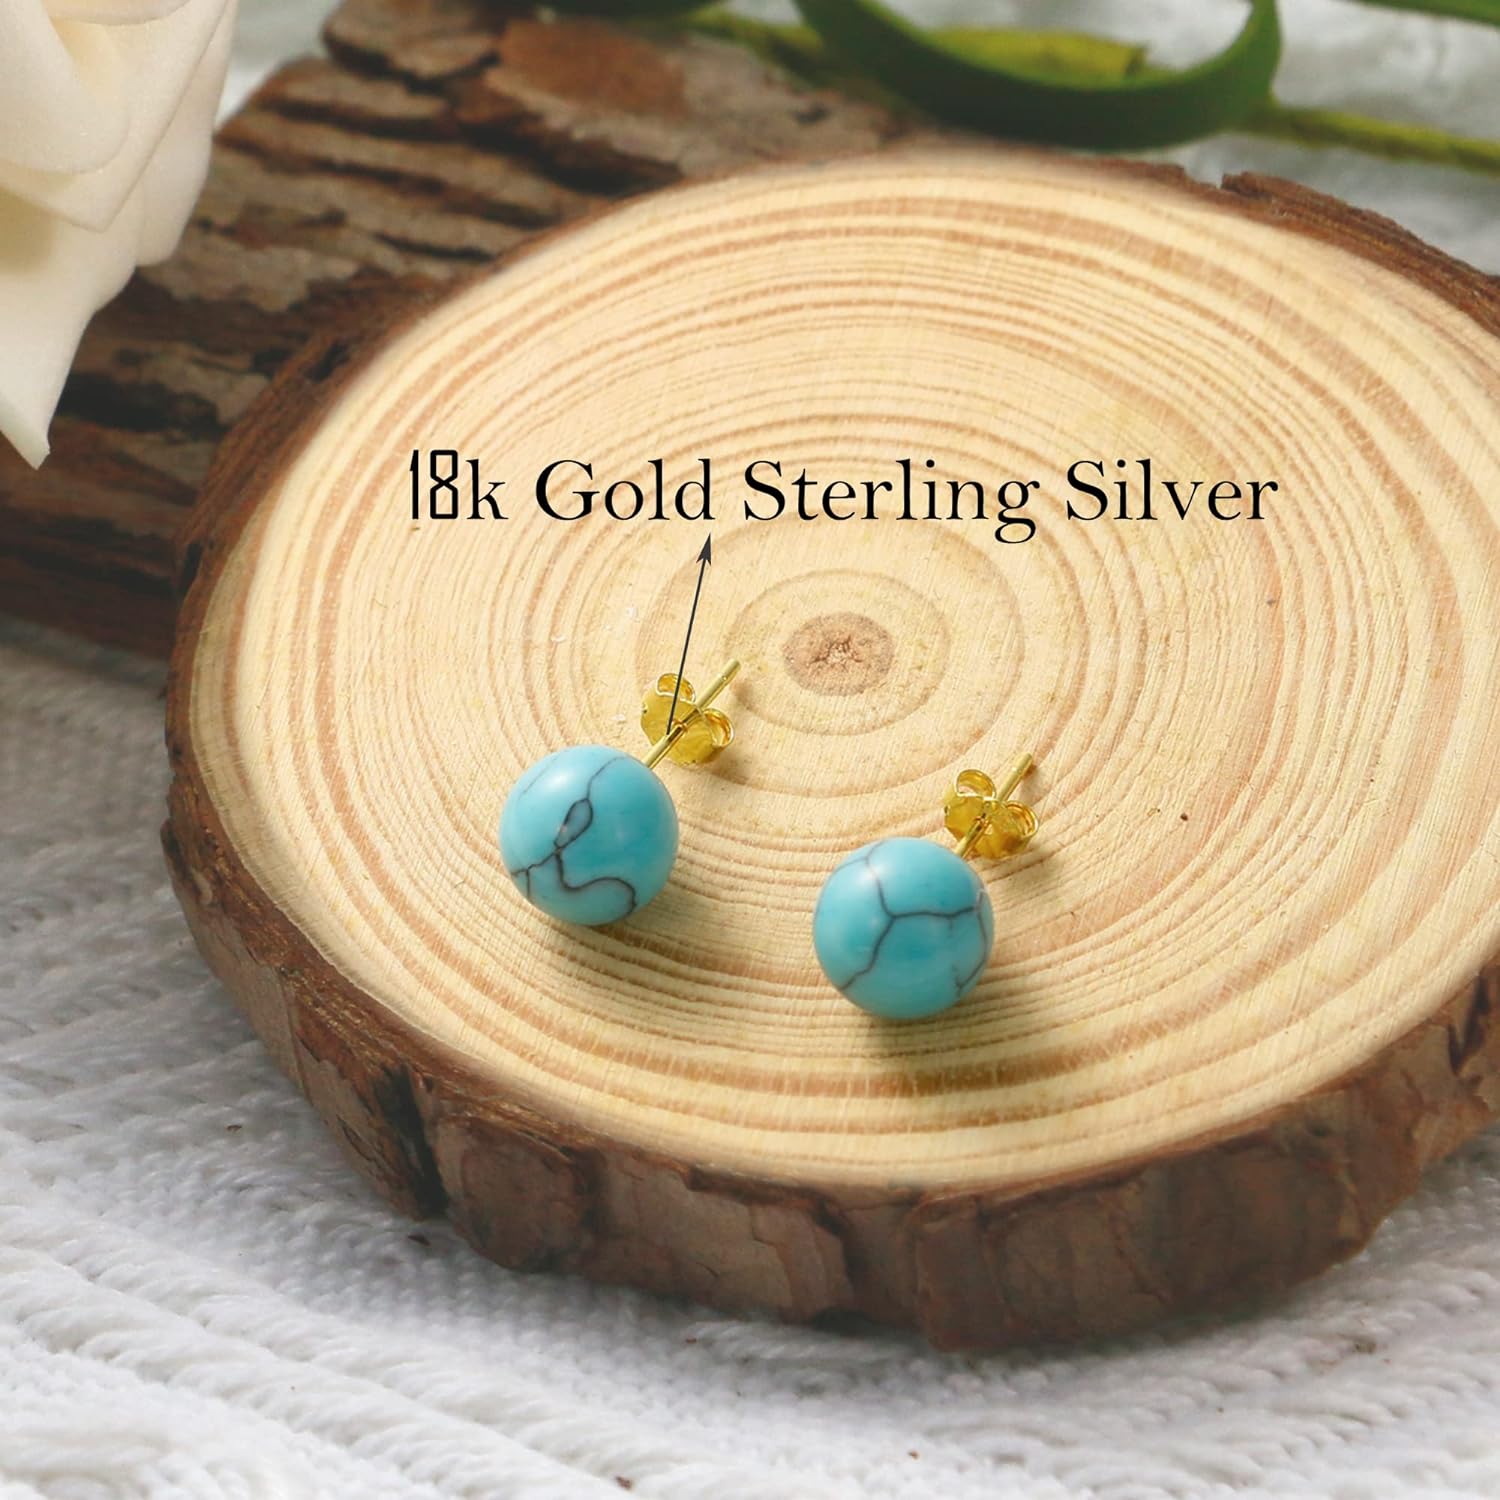 SmileBelle Turquoise earrings for women, 18k turquoise jewelry as gold stud earrings,handmade genuine turquoise post earrings for Sensitive Ears as birthday gifts